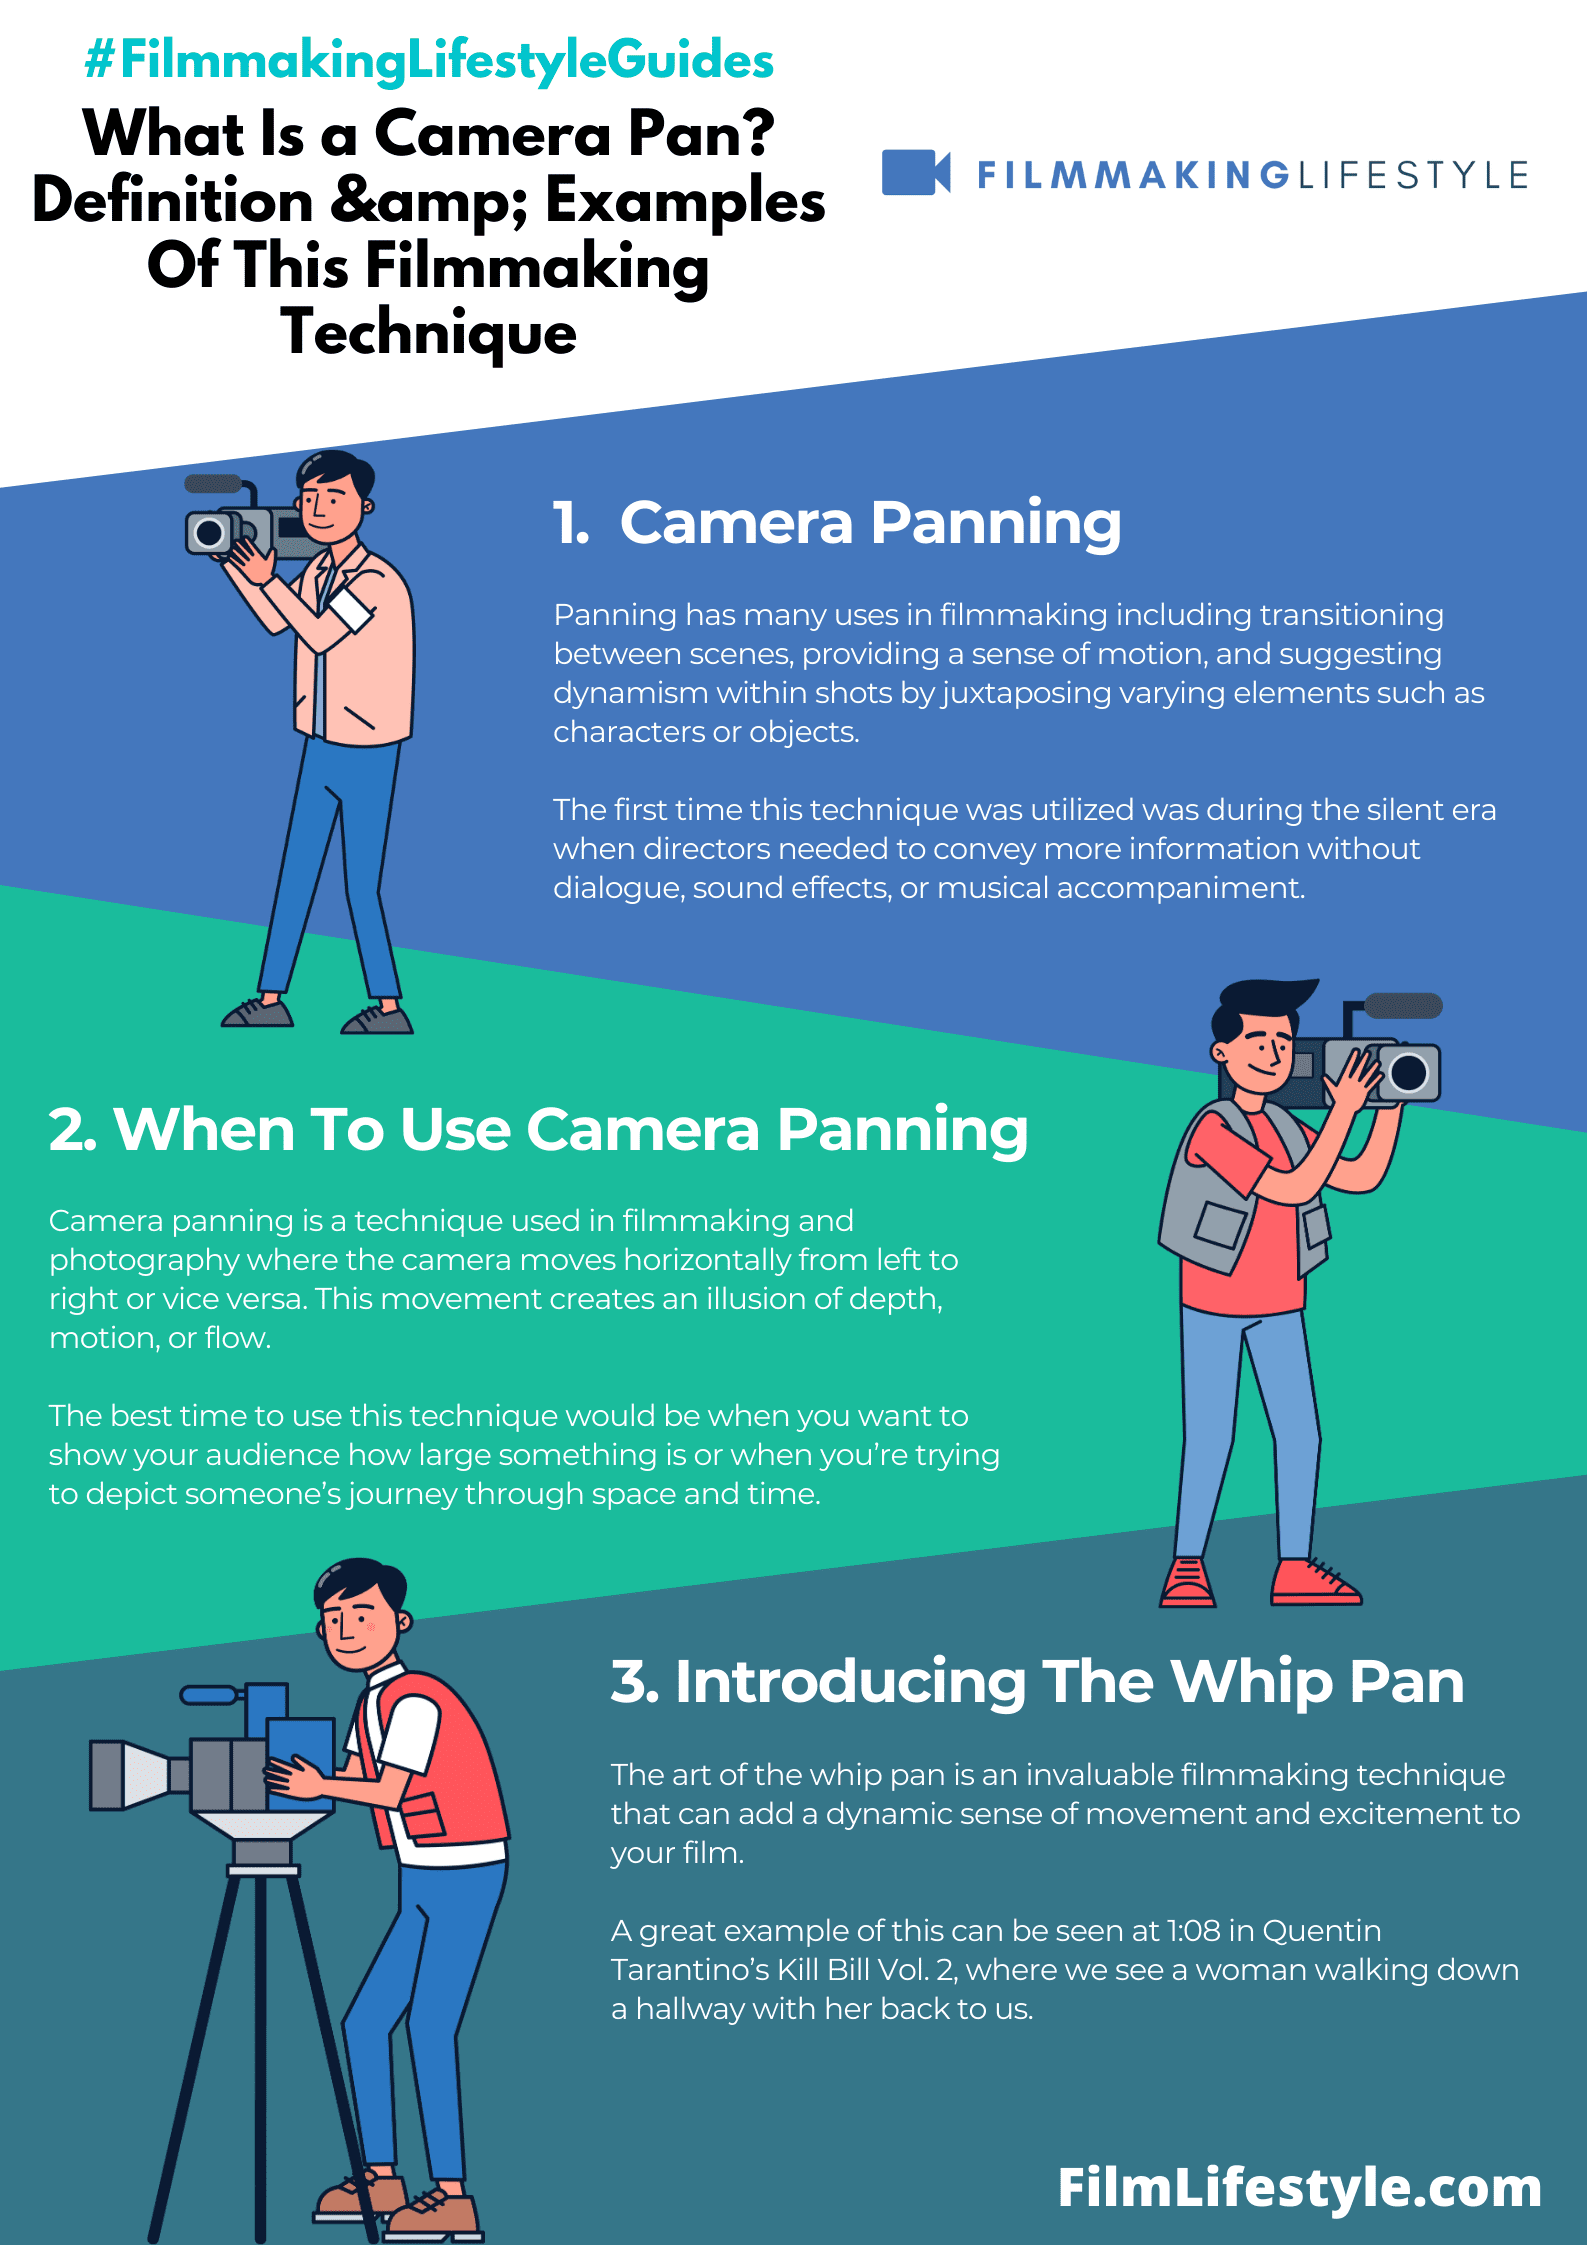 What Is a Camera Pan